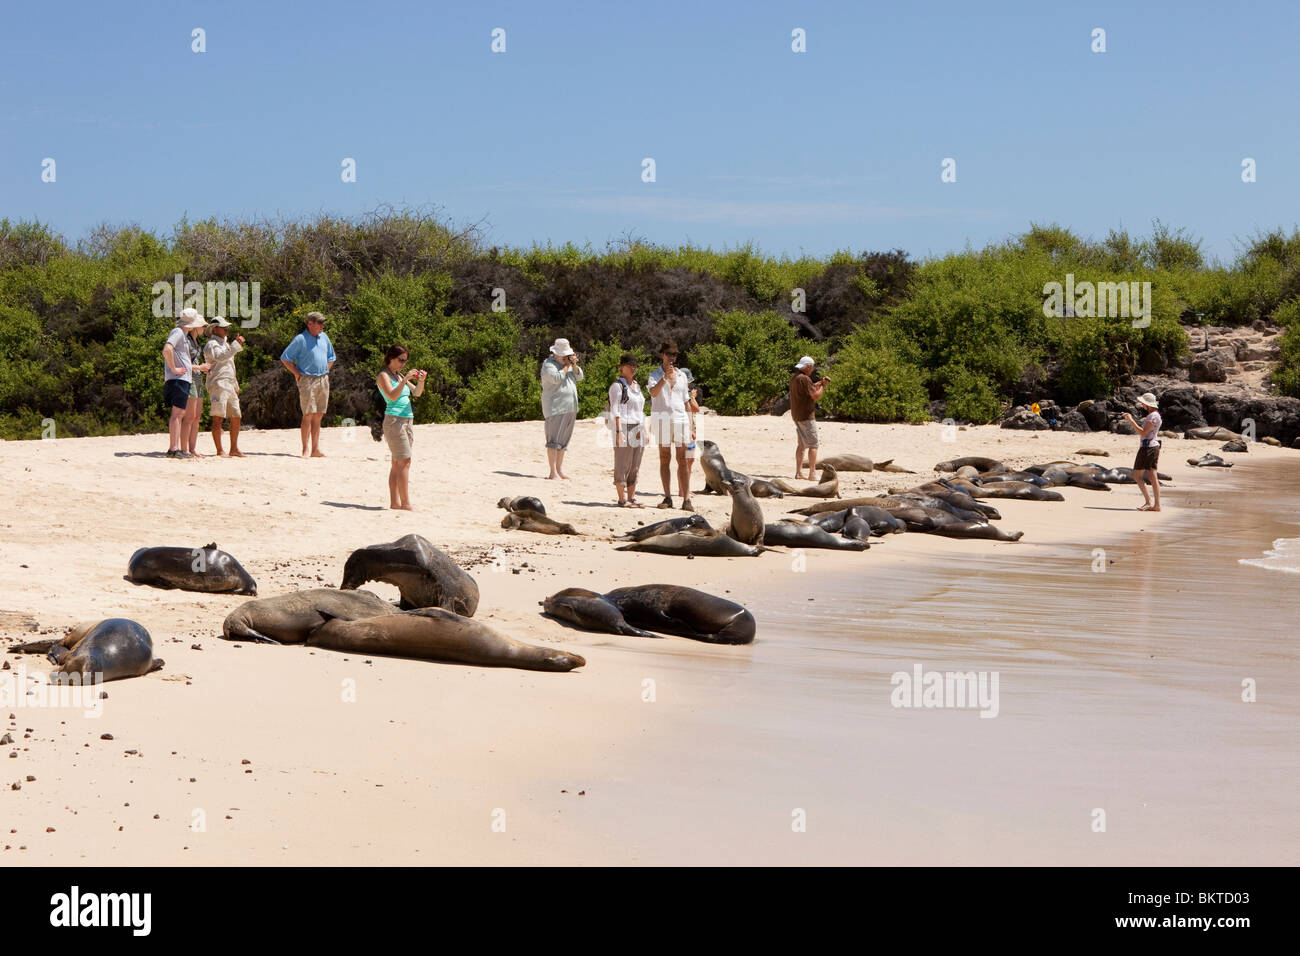 Tourists looking at Sea Lions on the beach on Santa Fe in the Galapagos Islands Stock Photo